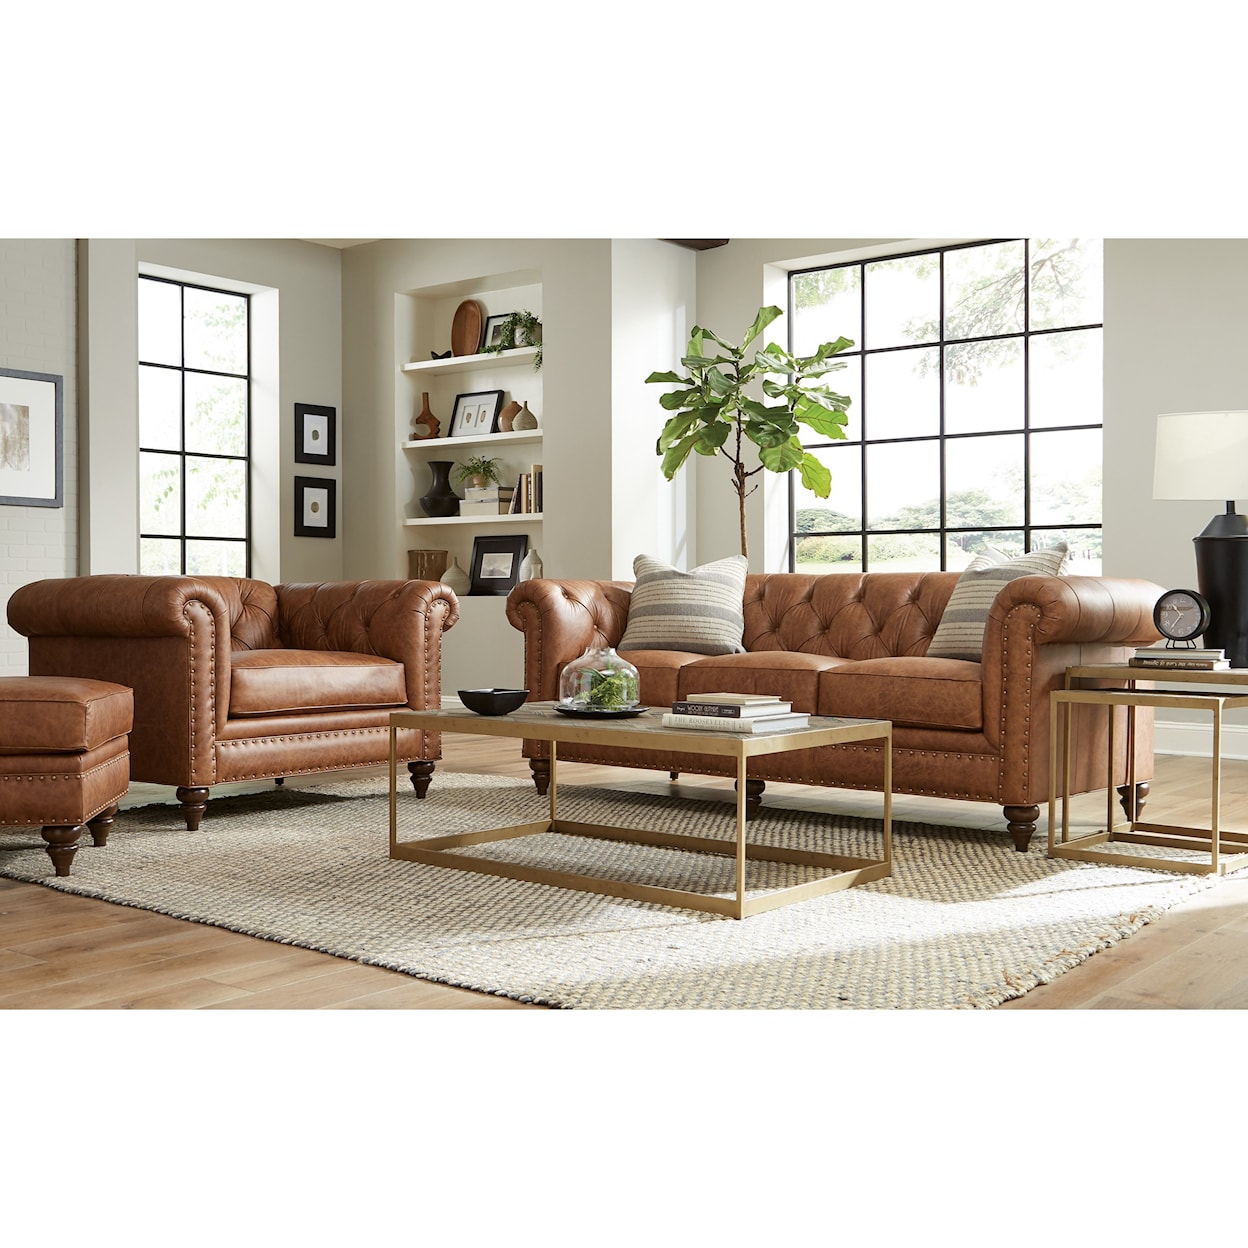 Hickory Craft L743350 88 Inch Sofa w/ Pillows